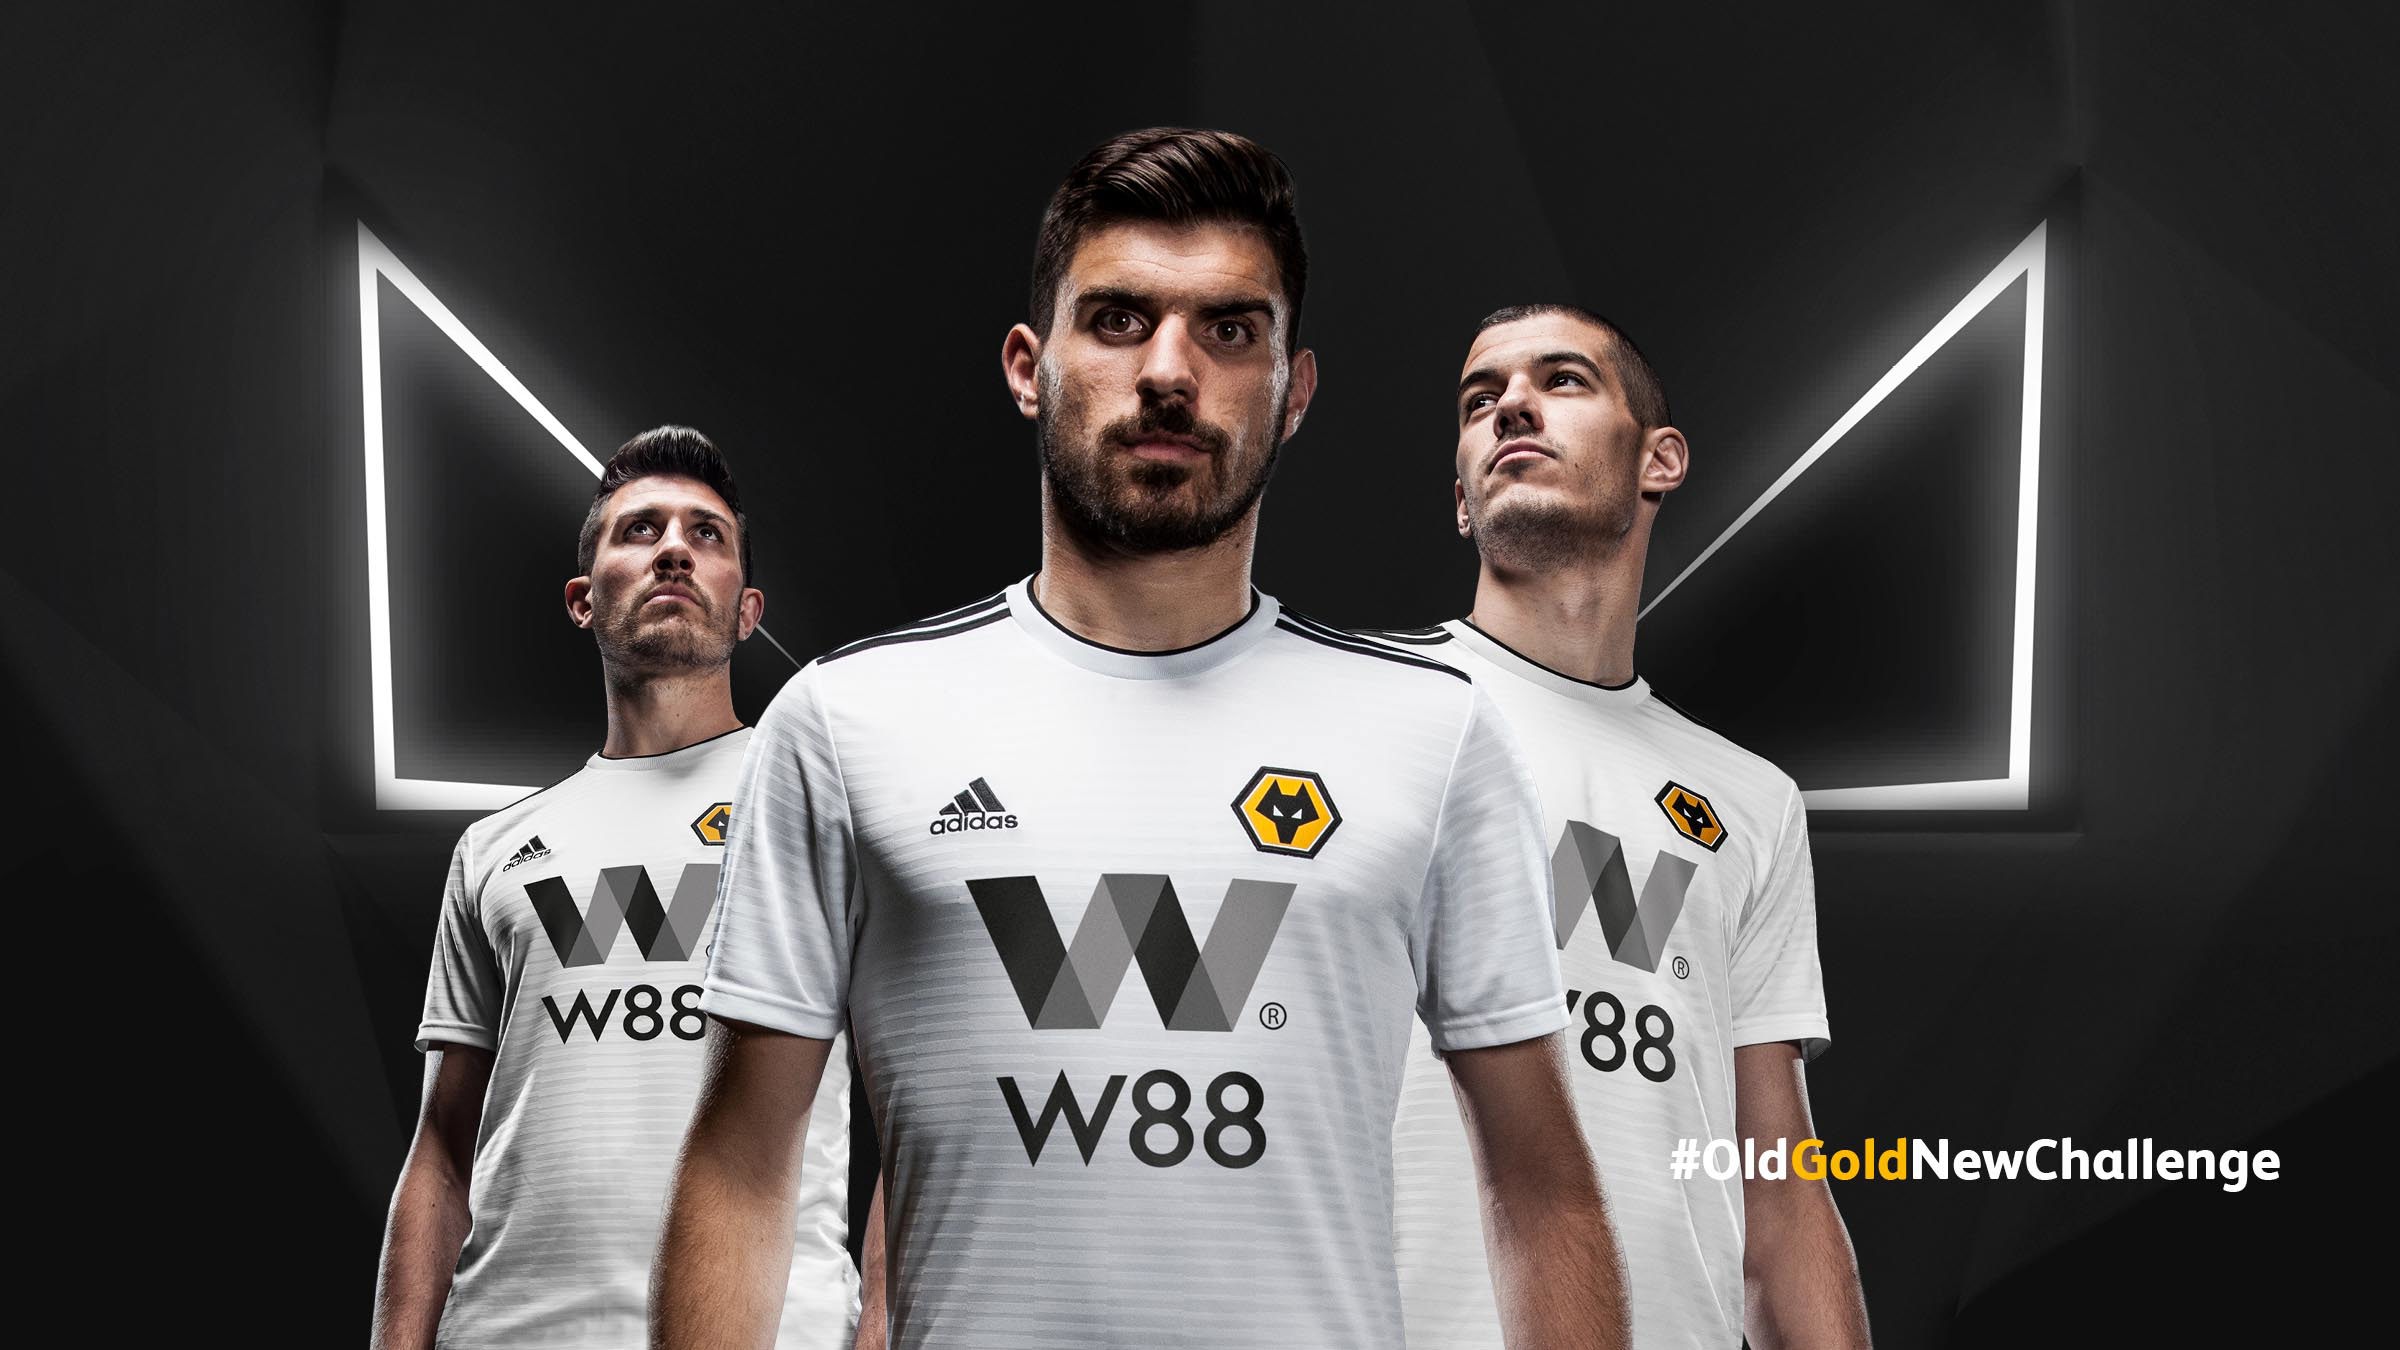 wolves fc jersey 2018